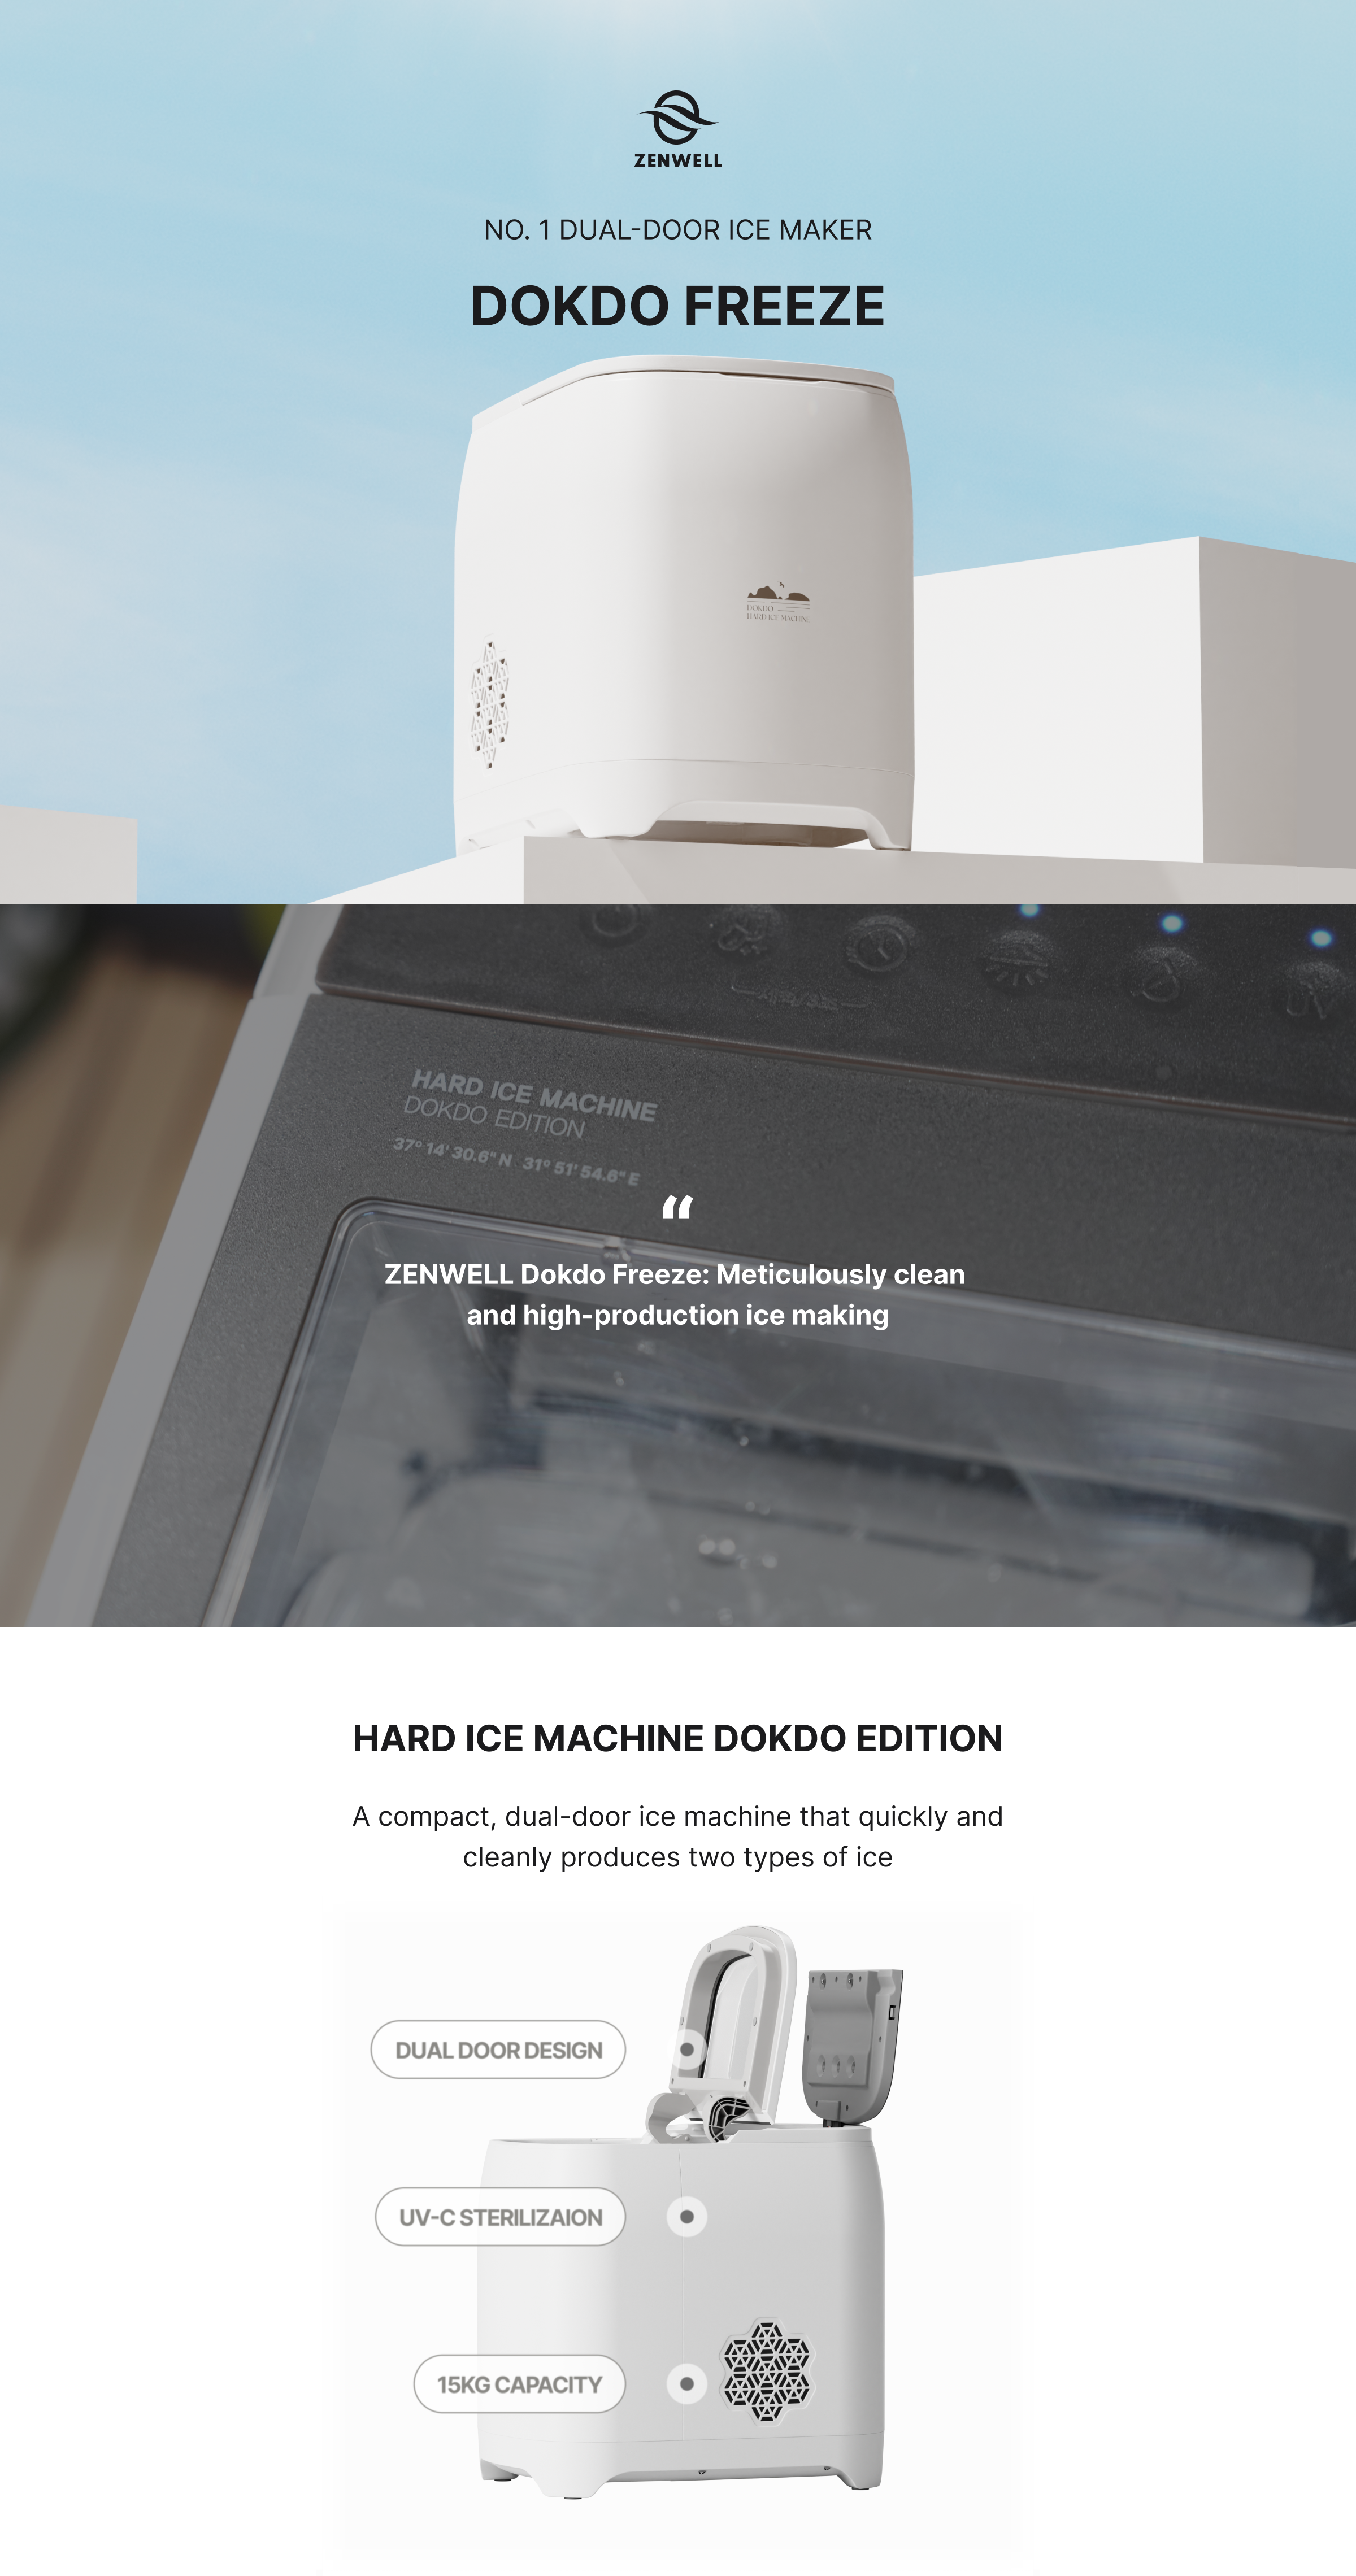 Dokdo Freeze product description image describing how this number one dual-door ice maker is meticulously clean and high-production. Also, how the compact hard ice machine quickly produces two types of ice, uses UVC sterilization, and has a 15kg ice bucket capacity.